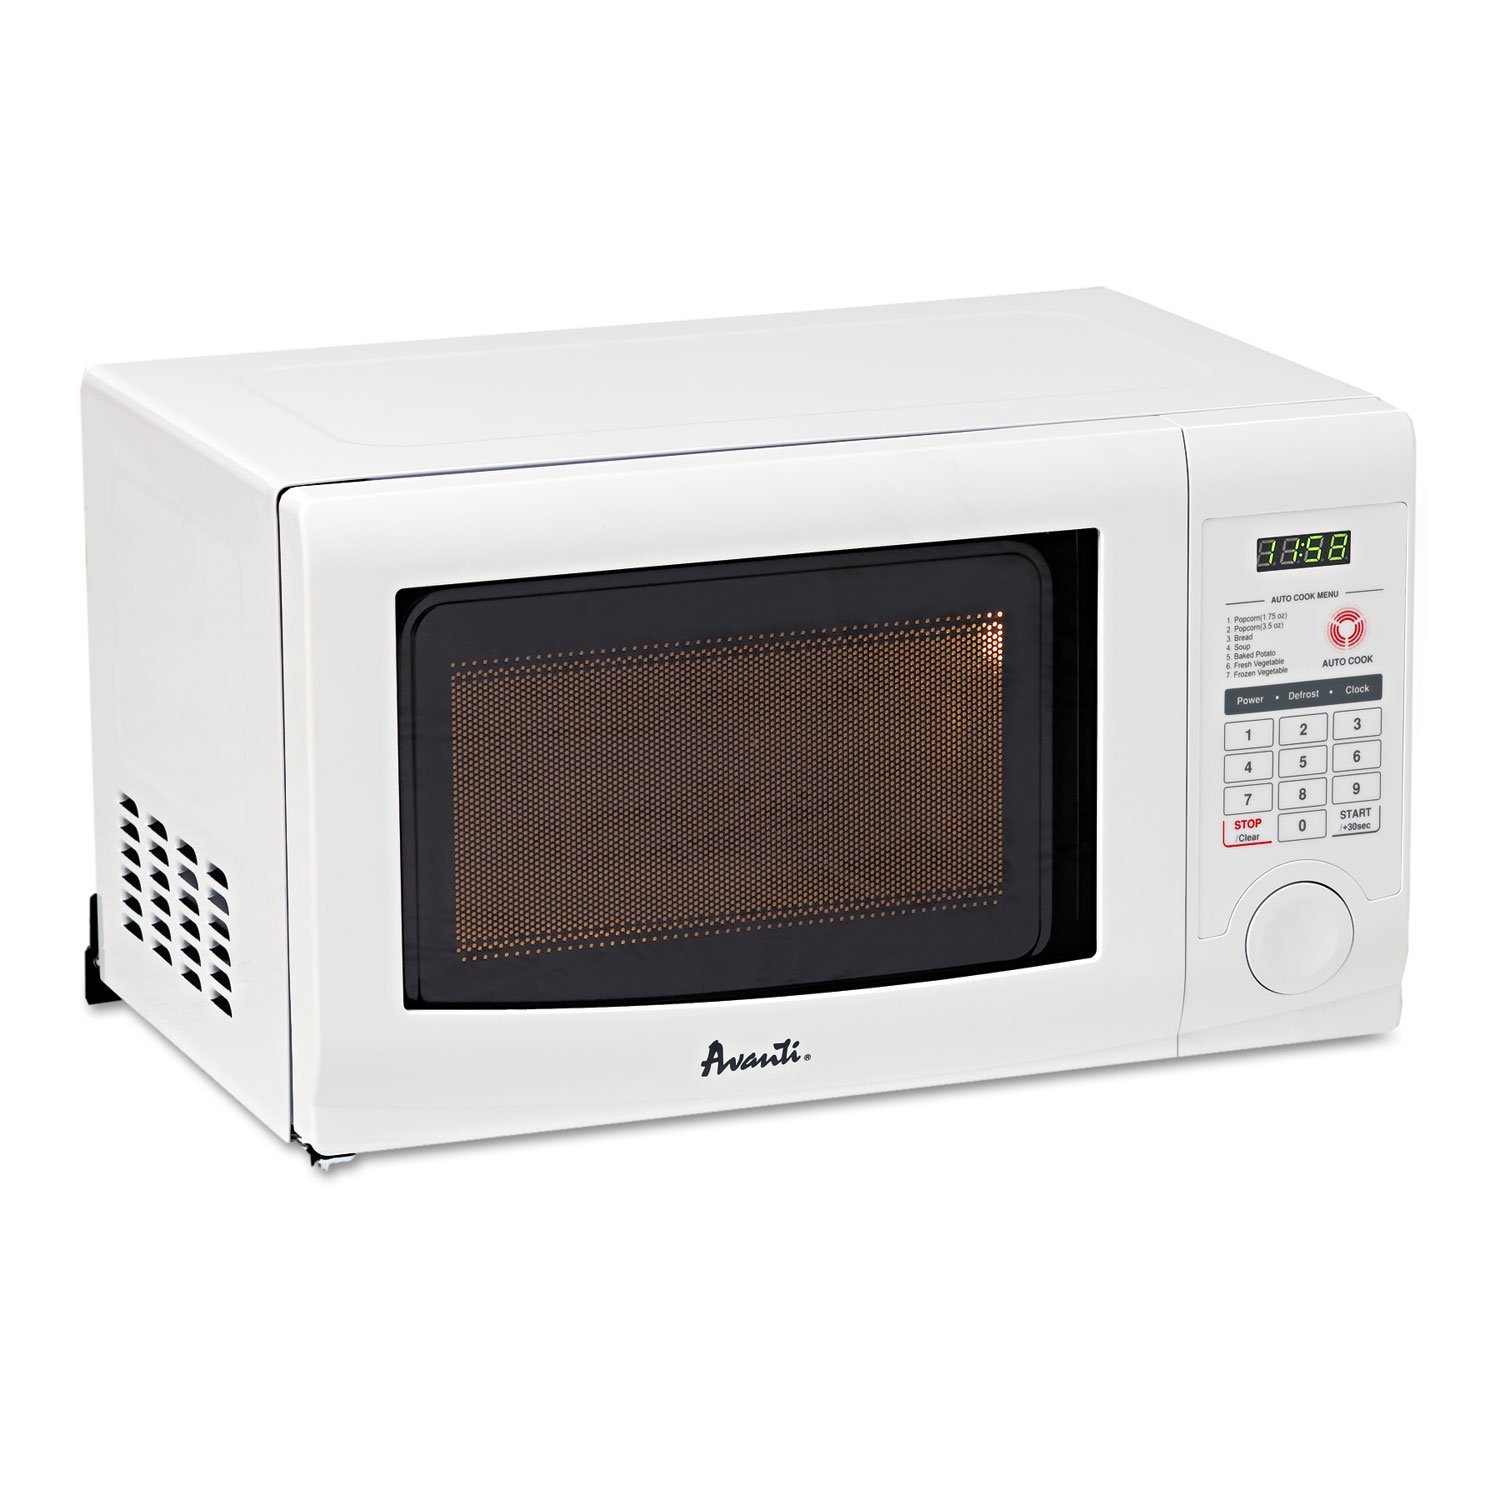 Avanti MO7191TW 0.7 Cubic Foot Capacity Microwave Oven, 700 Watts, White